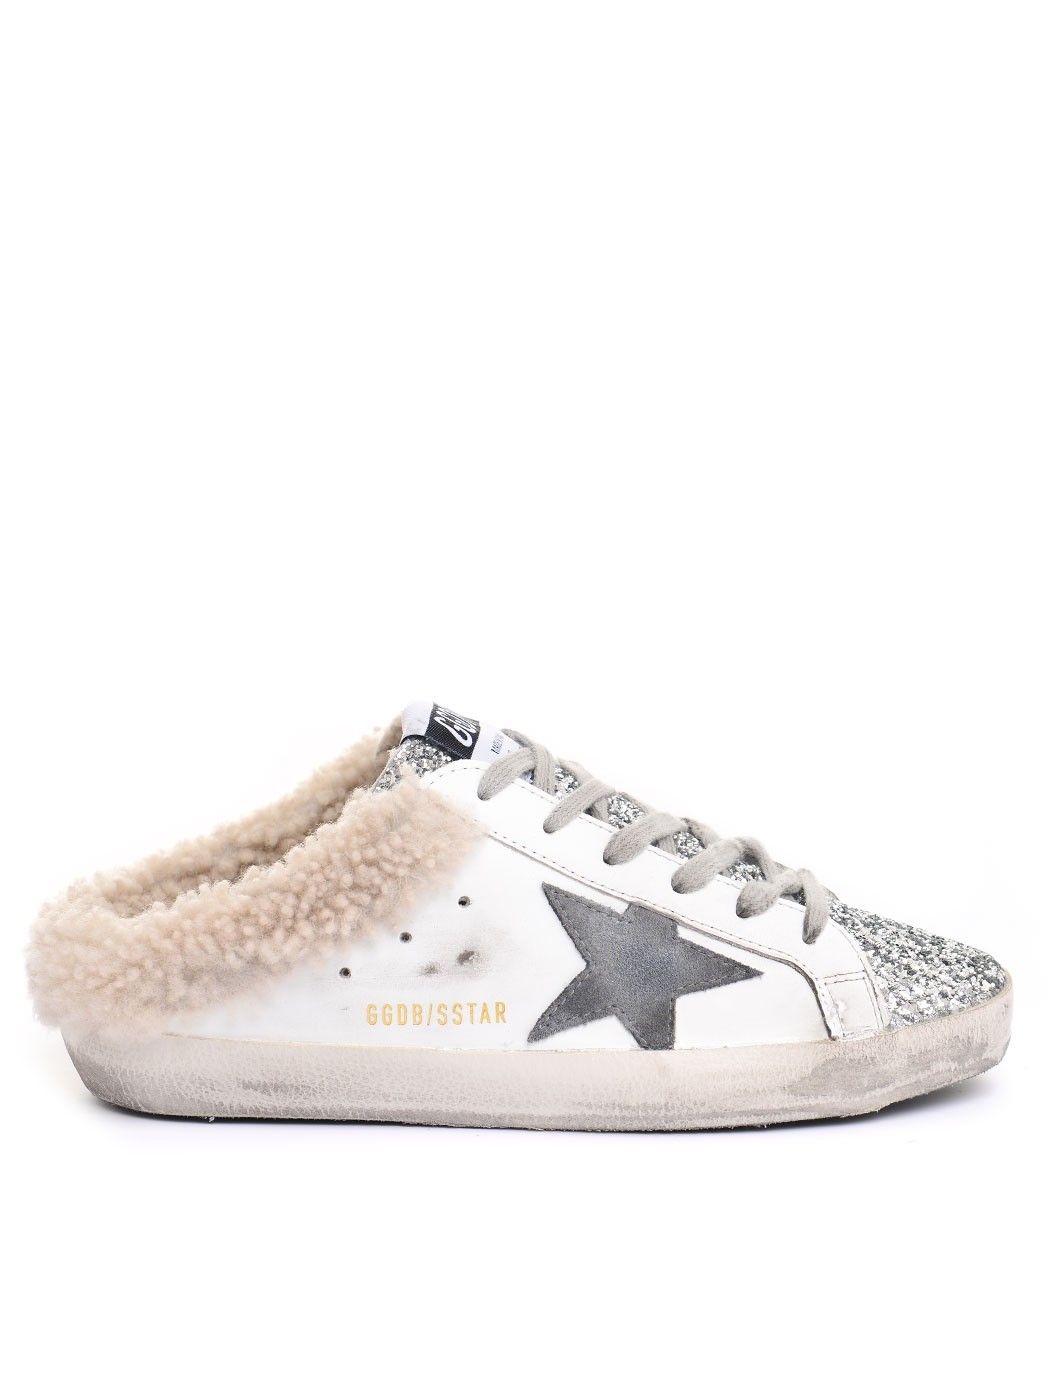  WOMAN SHOES,MARNI SHOES,GOLDEN GOOSE SNEAKERS,GOLDEN GOOSE SHOES,GIVENCHY SHOES,GIVENCHY SANDALS,MARNI SNEAKERS  GOLDEN GOOSE GWF00110